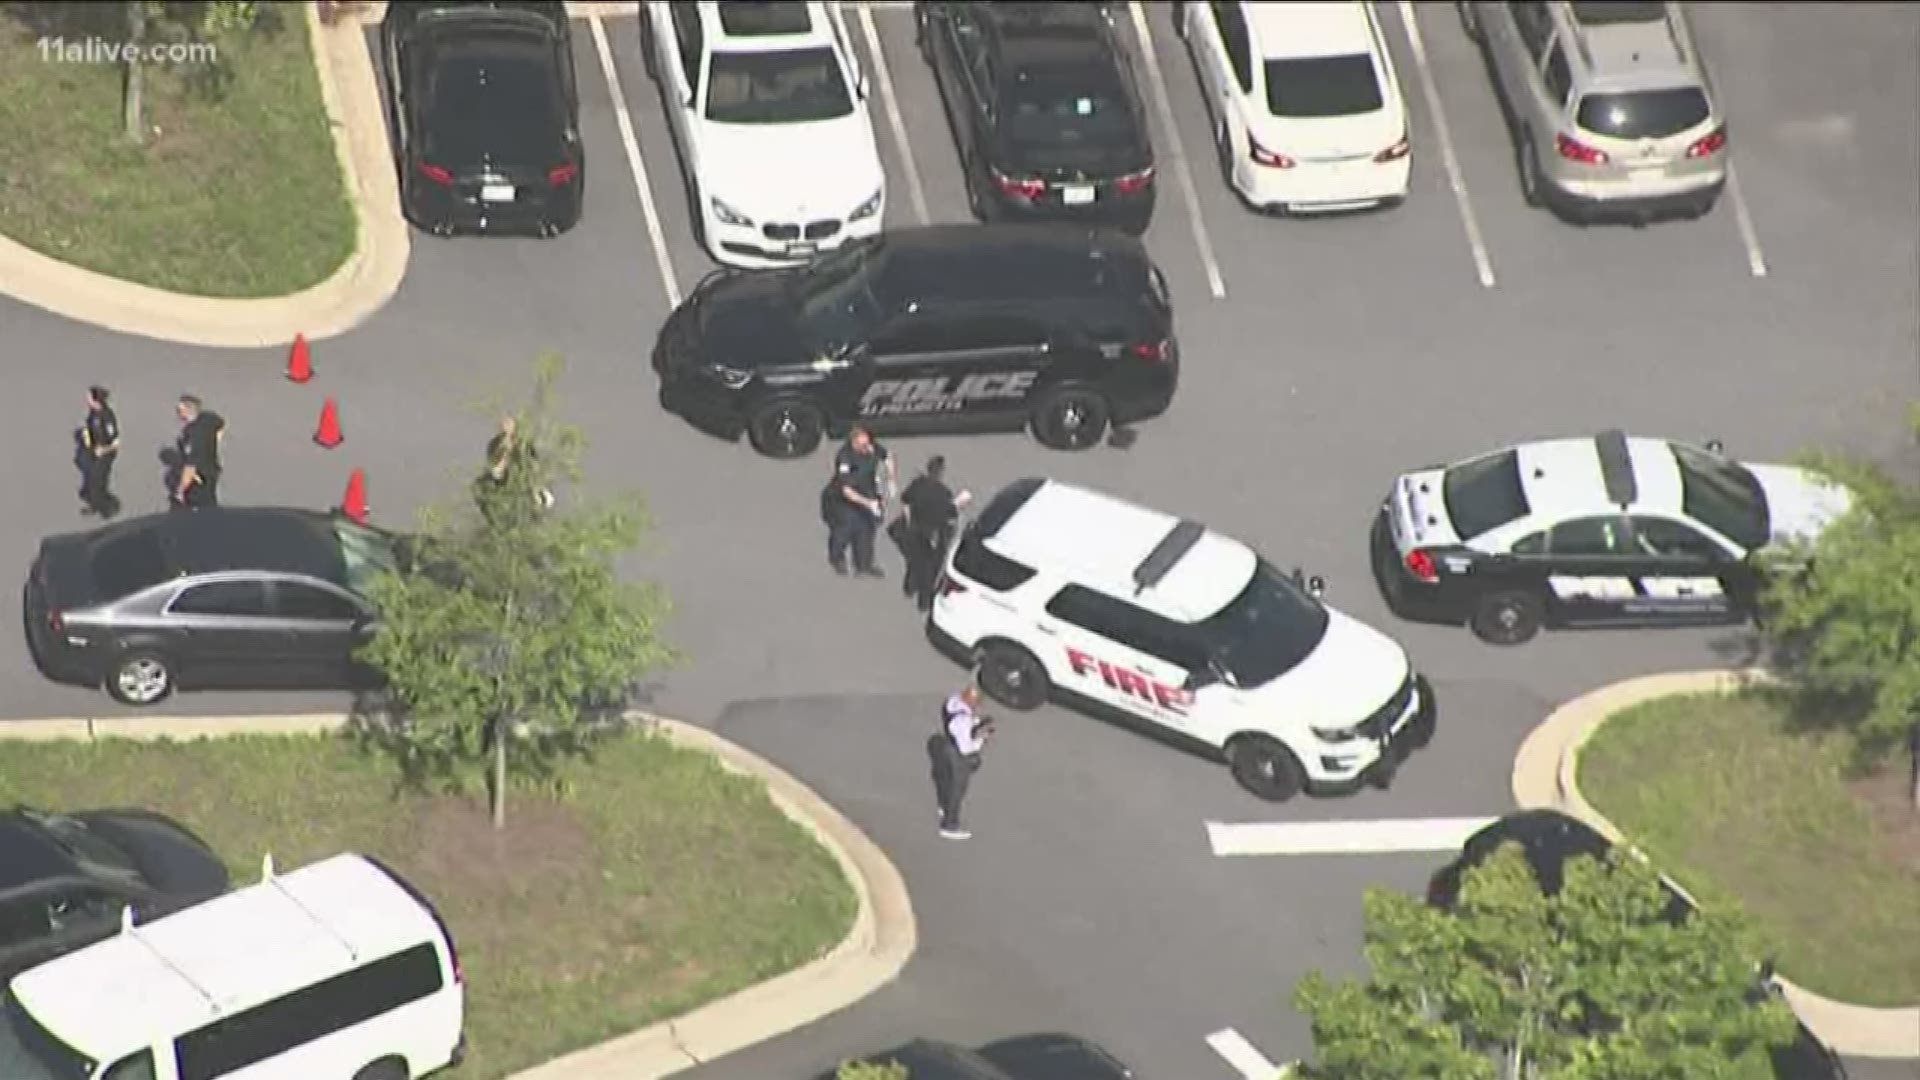 Police were not able to confirm that there was an actual armed person at Fiserv off Westside Parkway in Alpharetta when they responded.